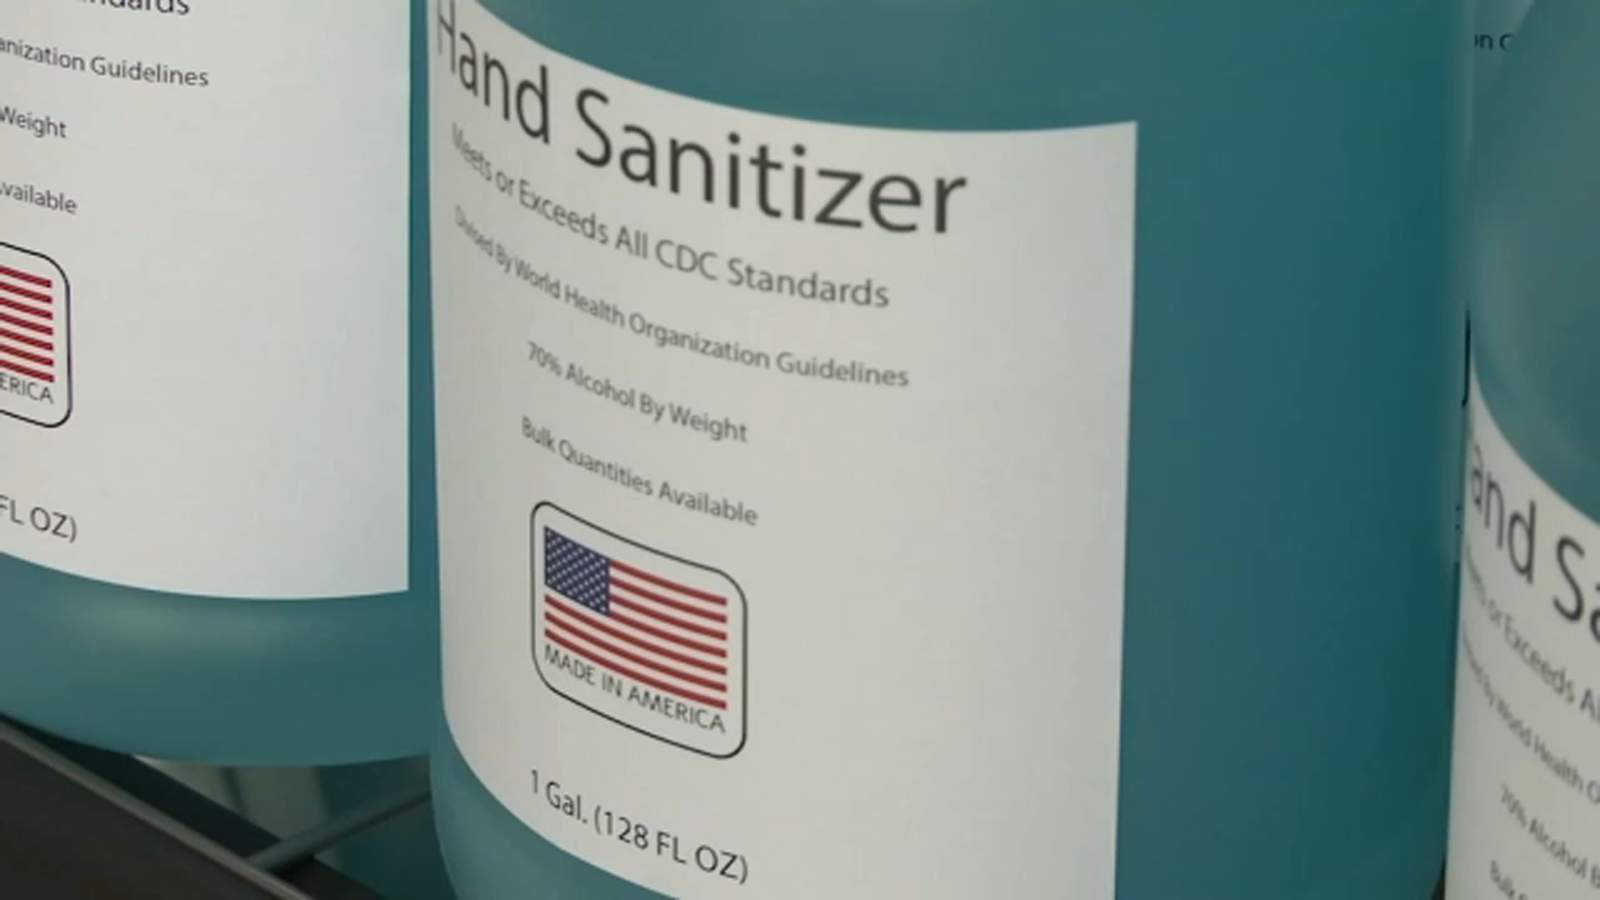 Looking for lots of hand sanitizer? This Pearland chemical company is selling gallons for $60